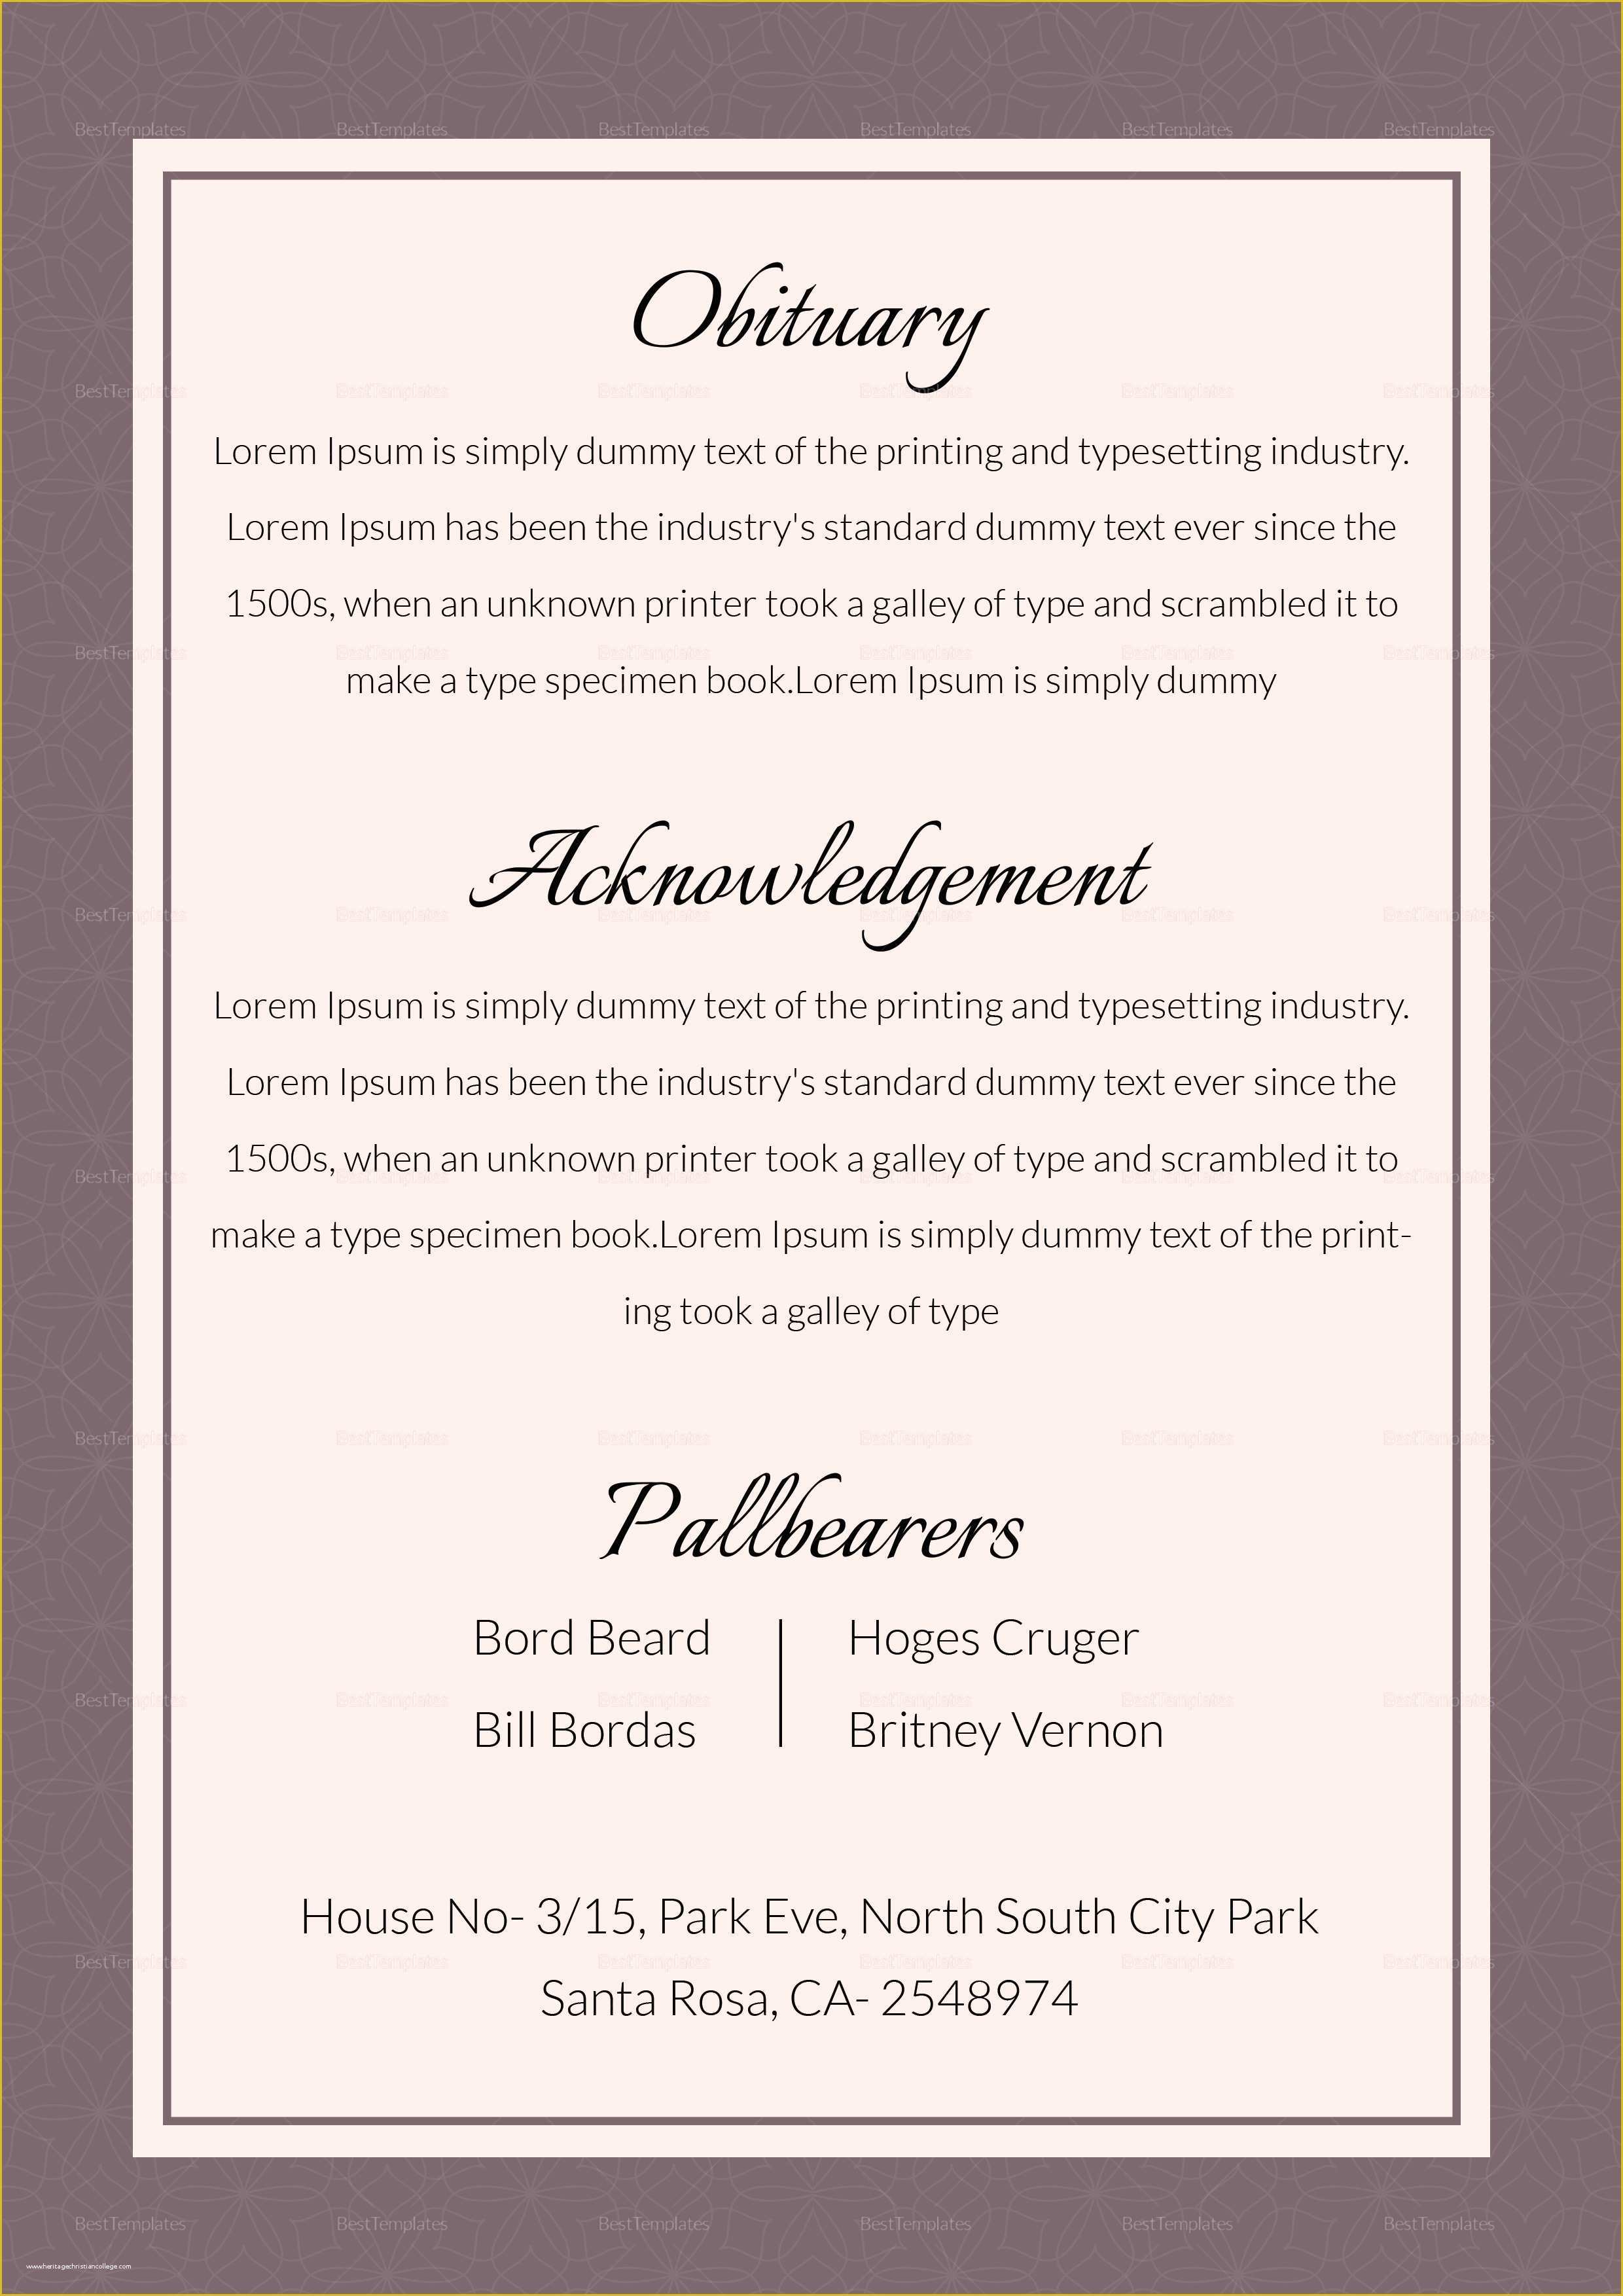 Free Obituary Template Photoshop Of Editable Funeral Obituary Template In Adobe Shop